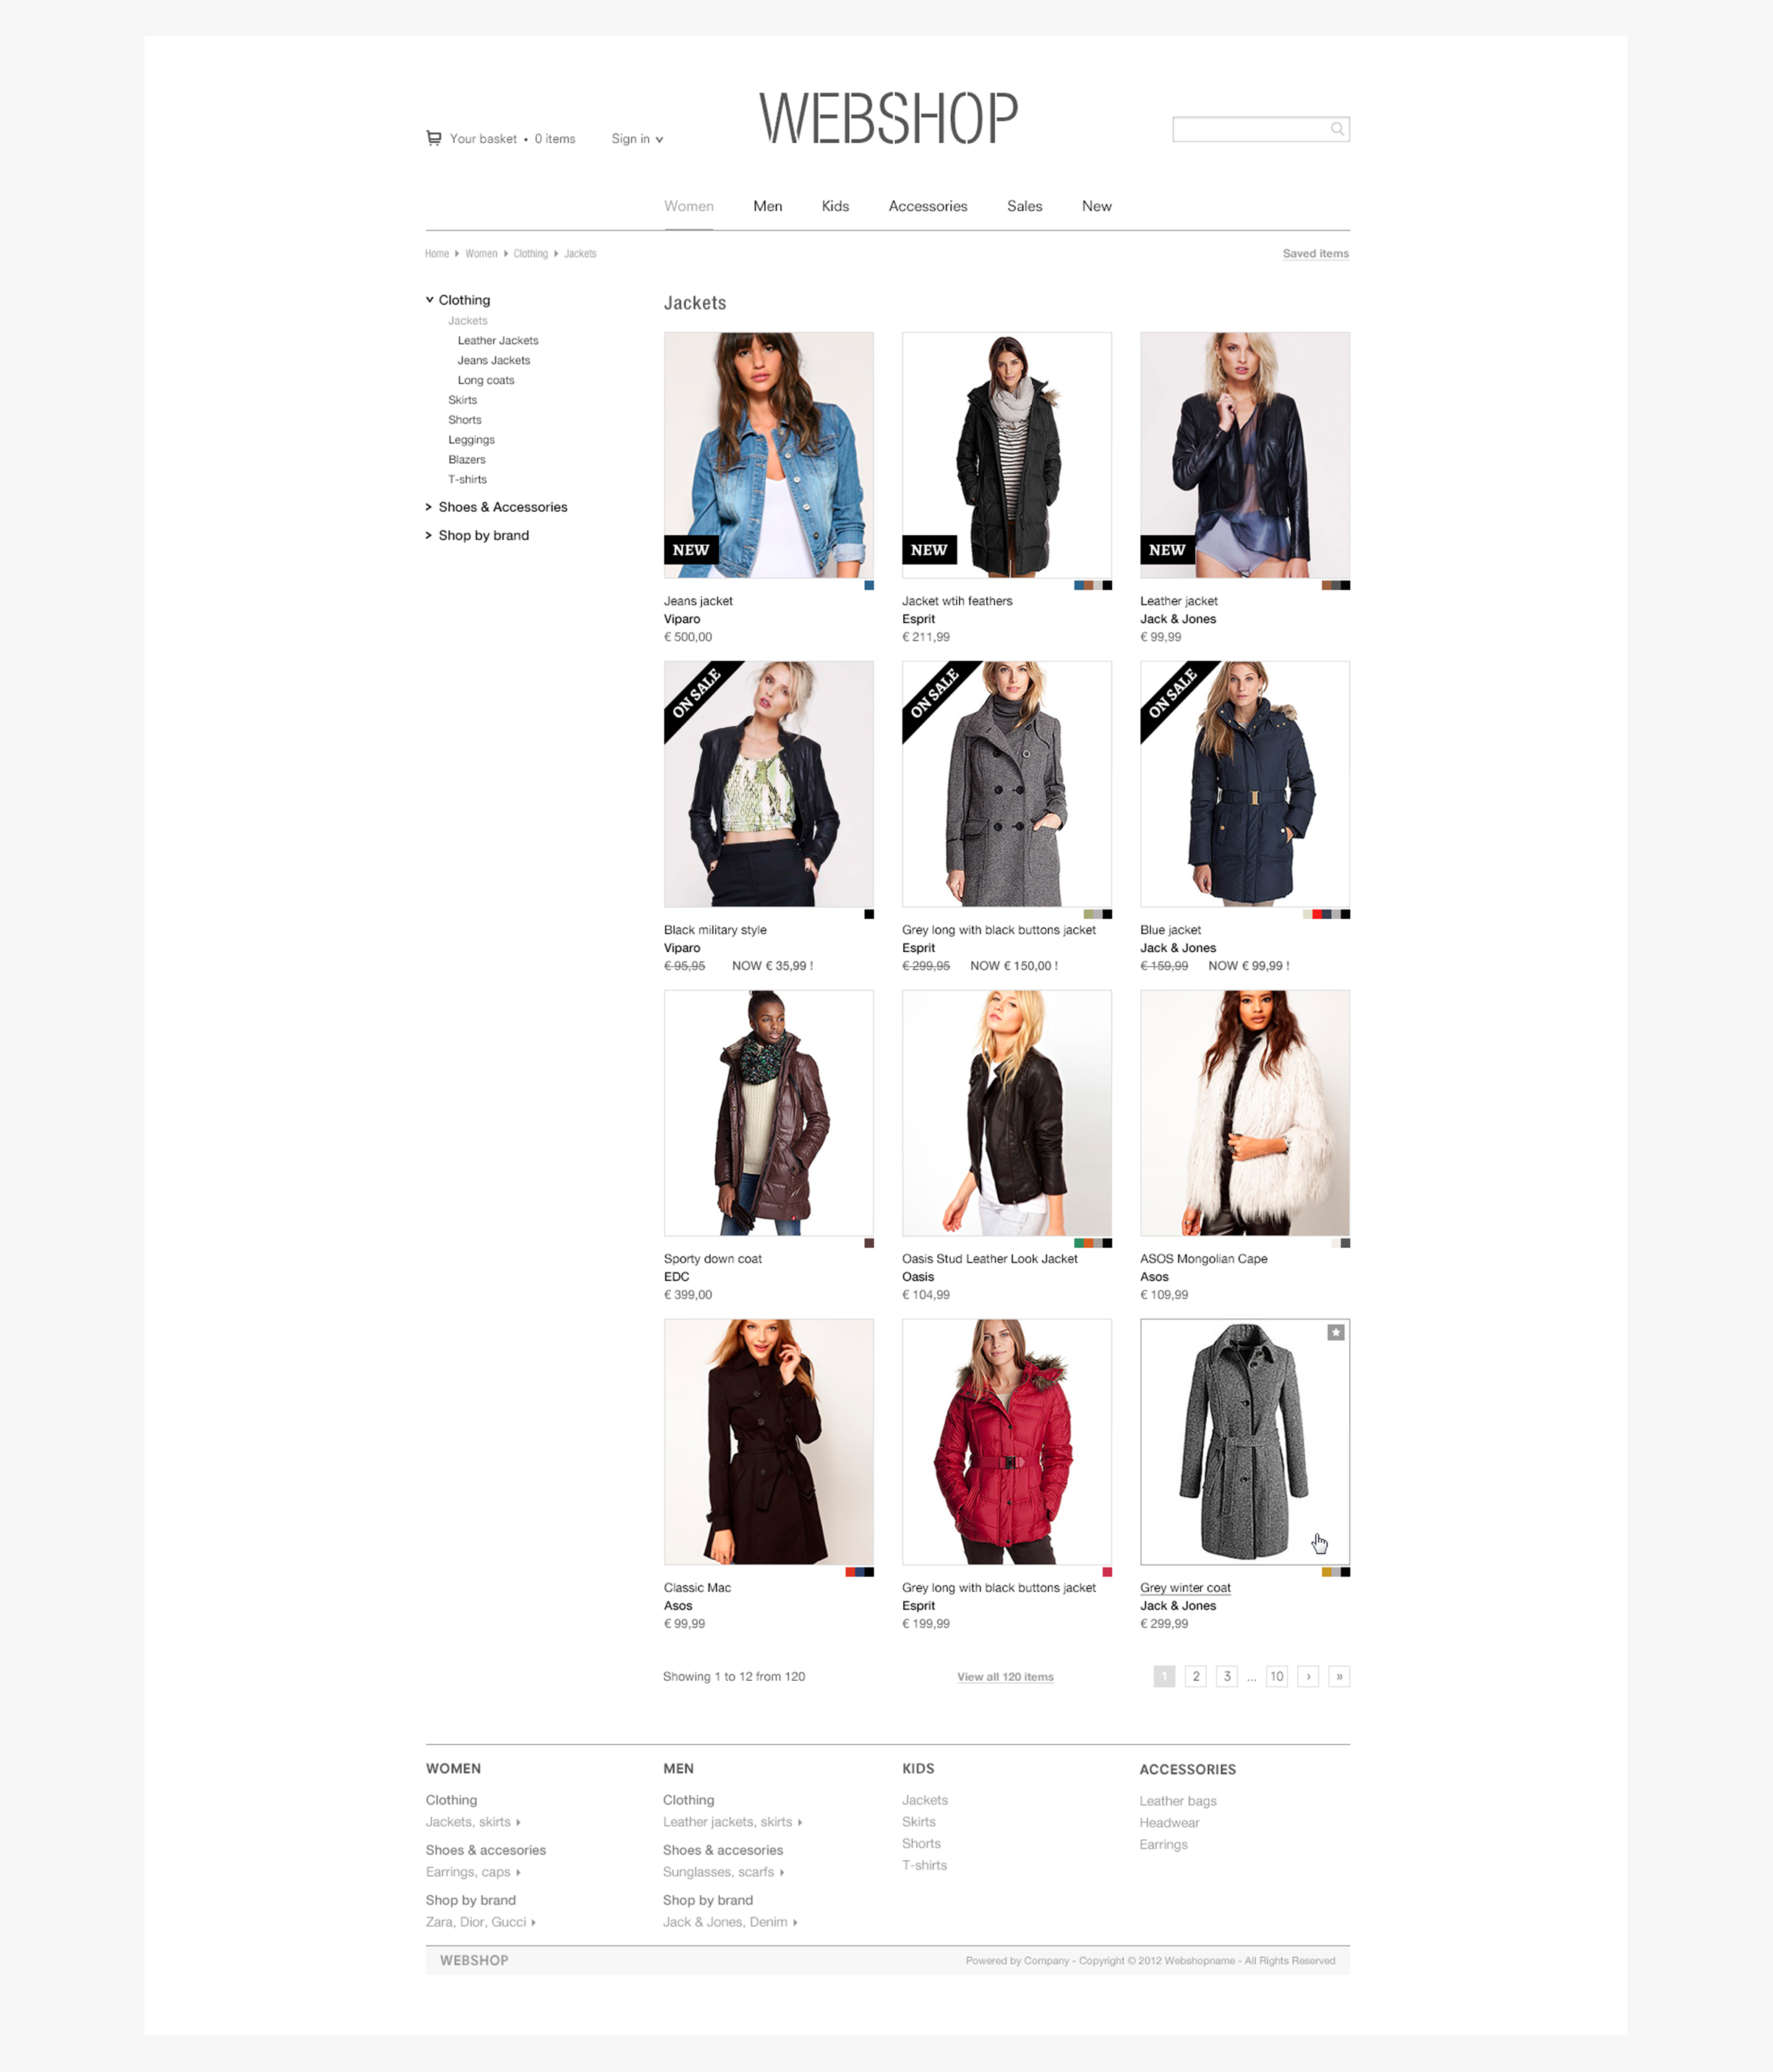 Webshop layout - product pages